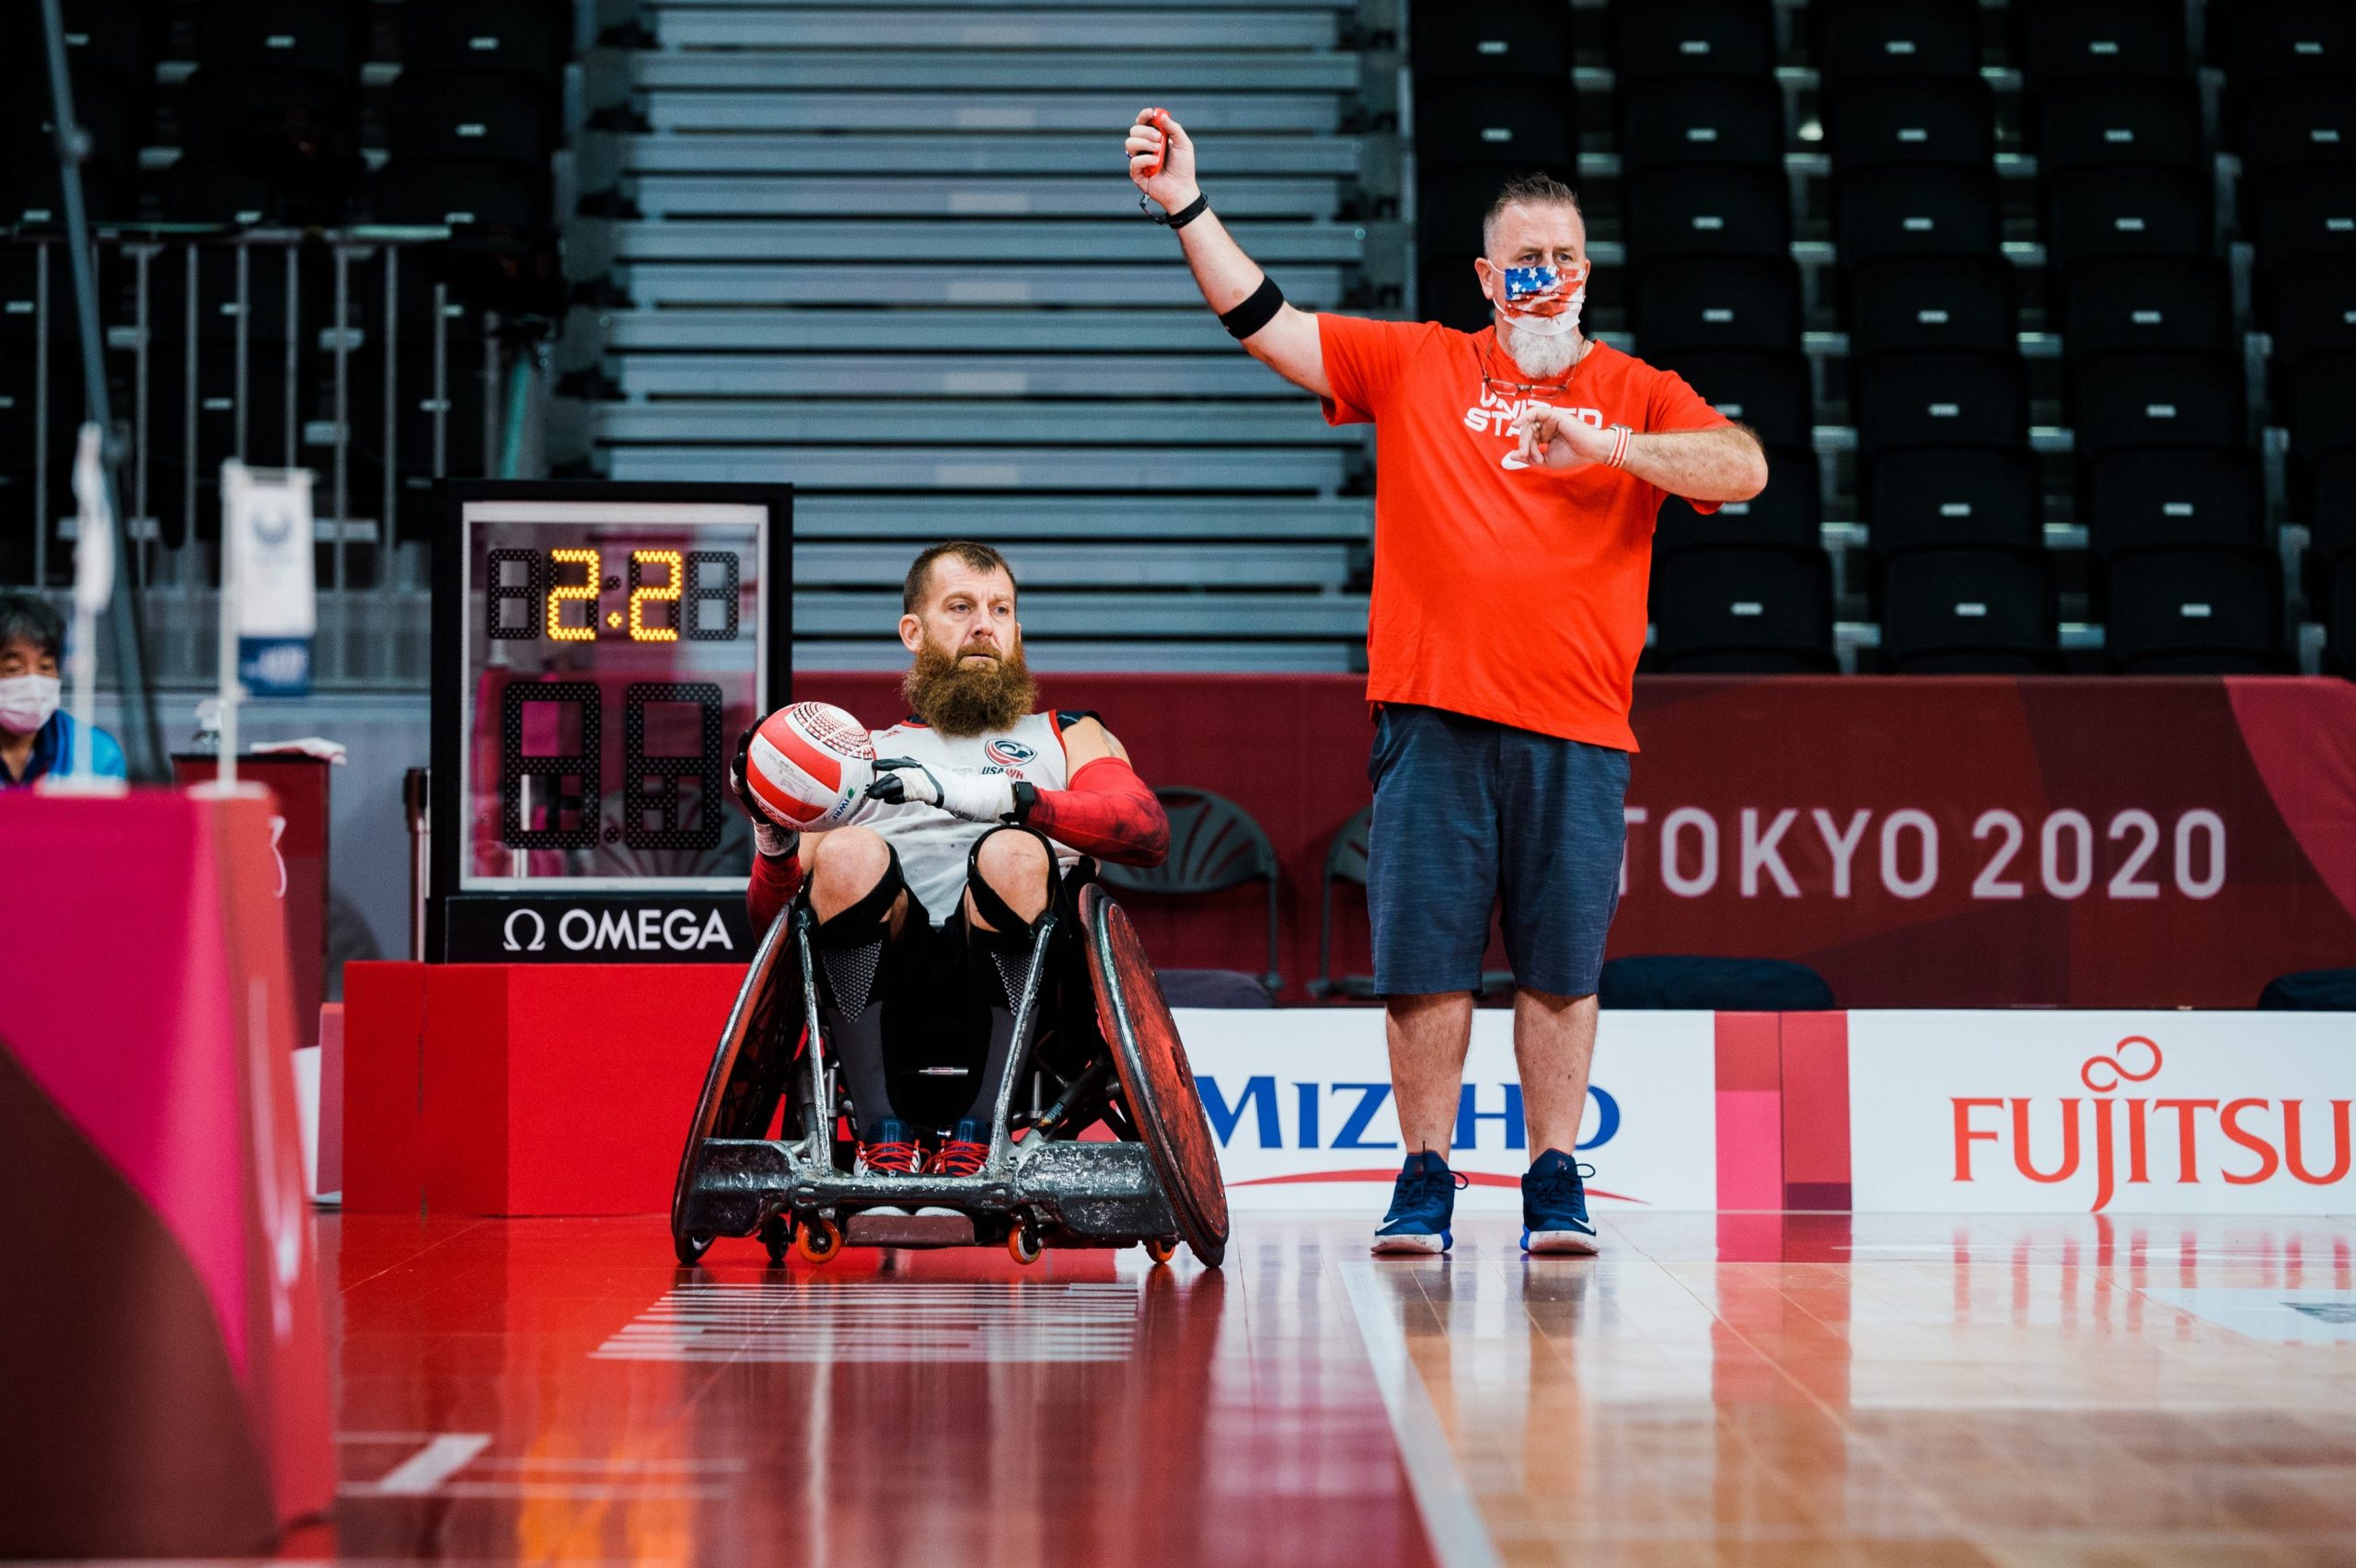 Wheelchair rugby player sits holding a ball next to standing man in mask holding his right arm up